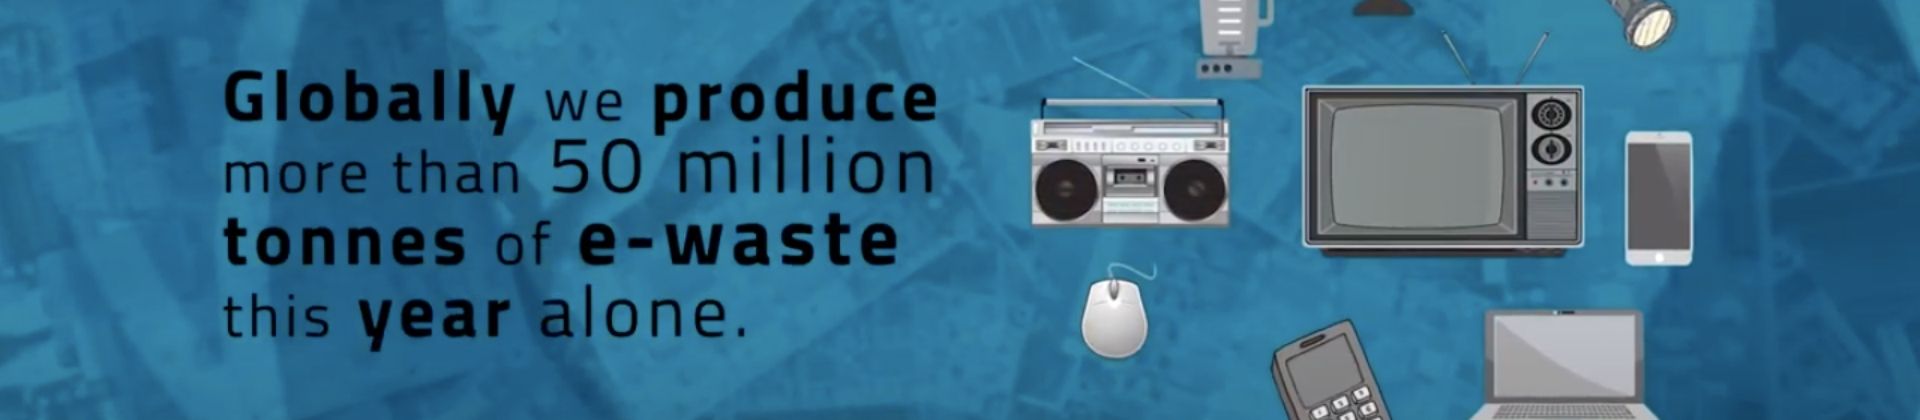 Why do we have an e-waste problem?